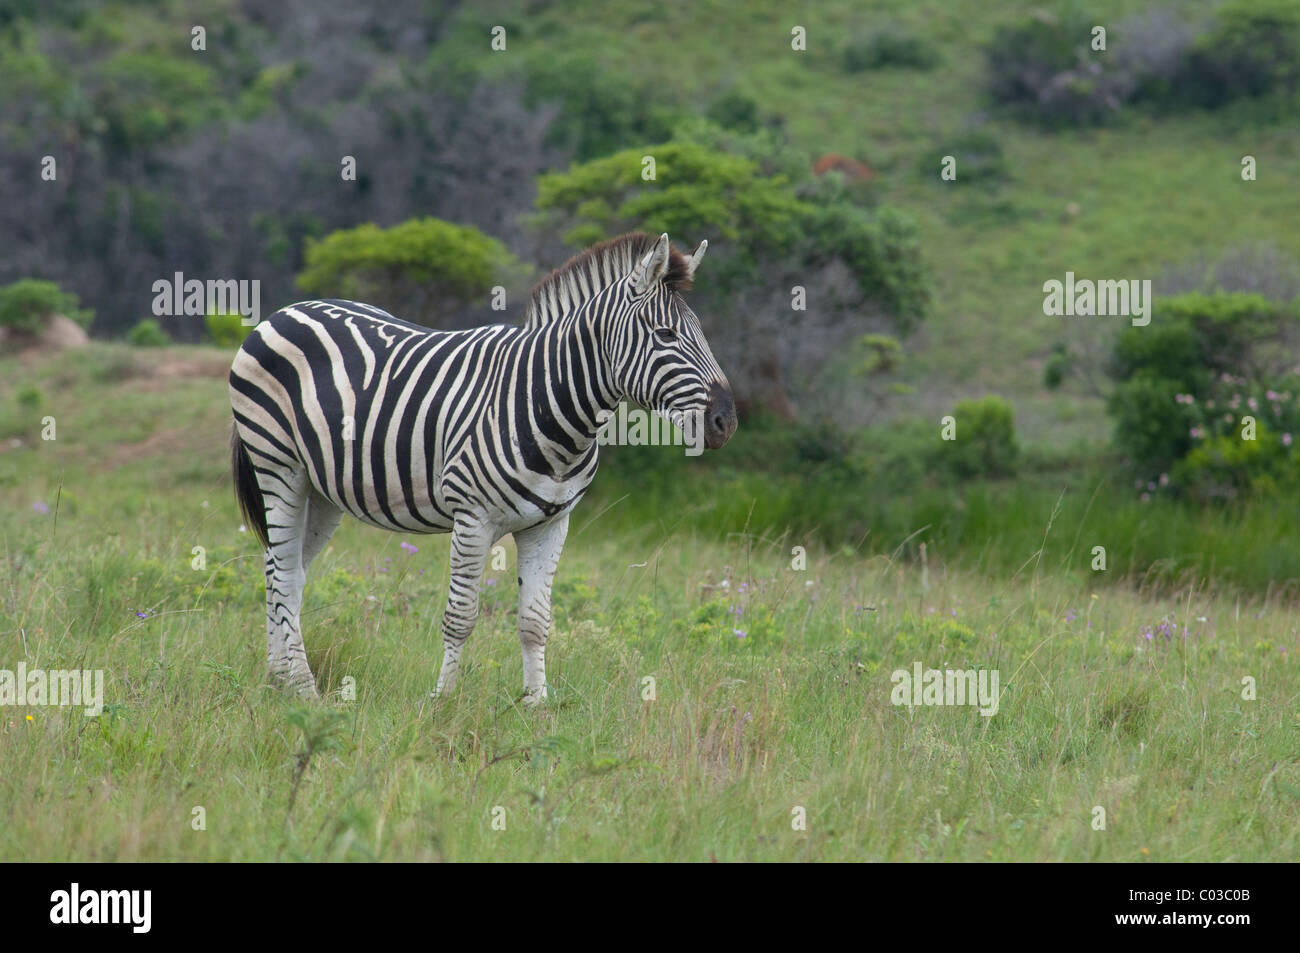 South Africa, East London, Inkwenkwezi Private Game Reserve. Common or Burchell's zebra. Stock Photo